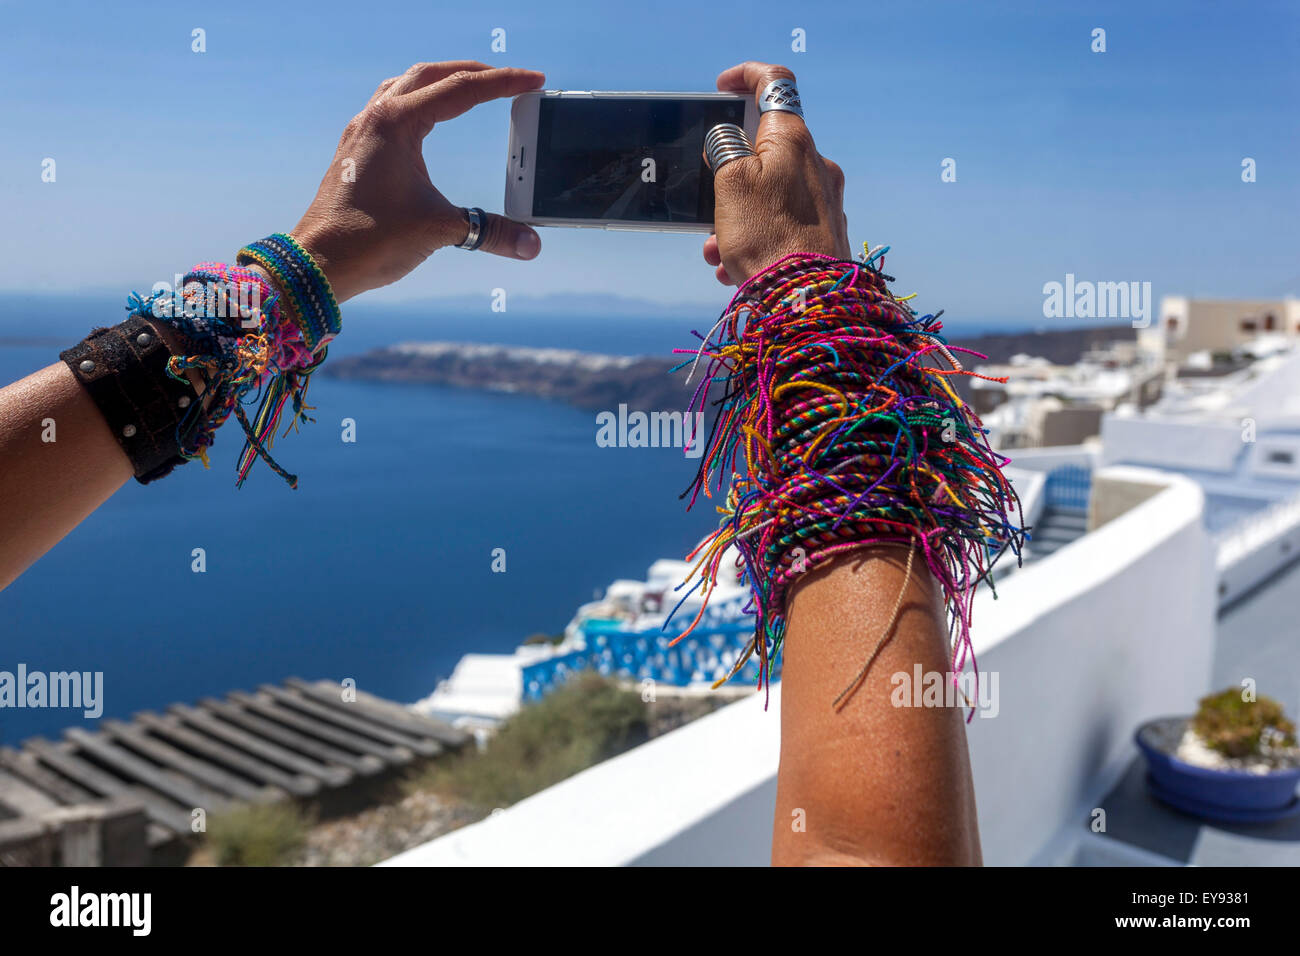 A large number of knitted woman bracelets on the girl's hands A woman taking a picture phone Santorini landscape Greece colorful  friendship bracelets Stock Photo